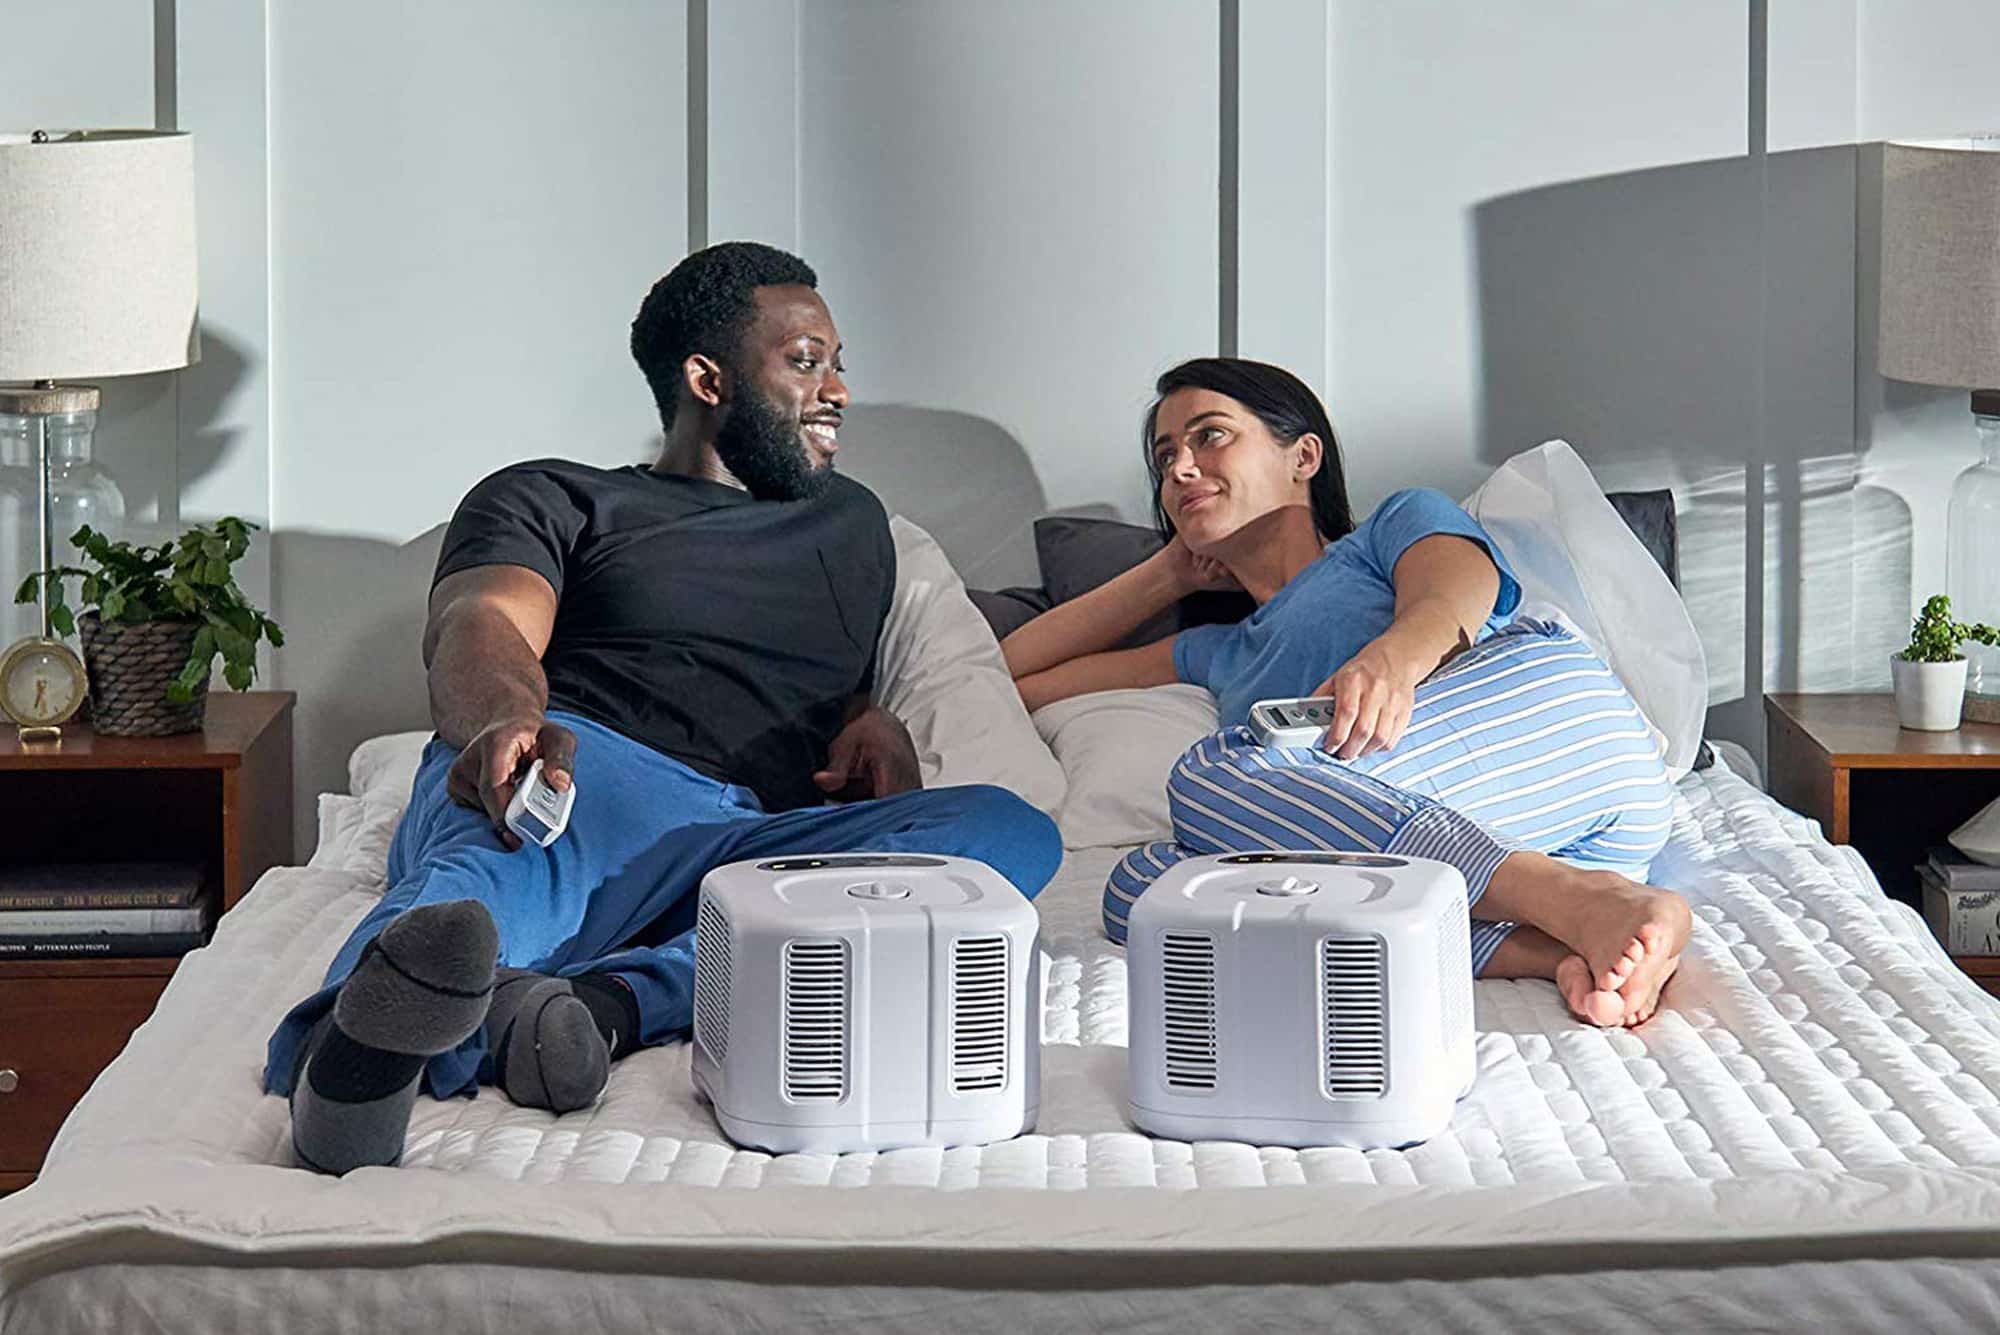 chilipad tulsa ok - Cube Sleep System Review: My Hands-On Experience [Read Before Buying]